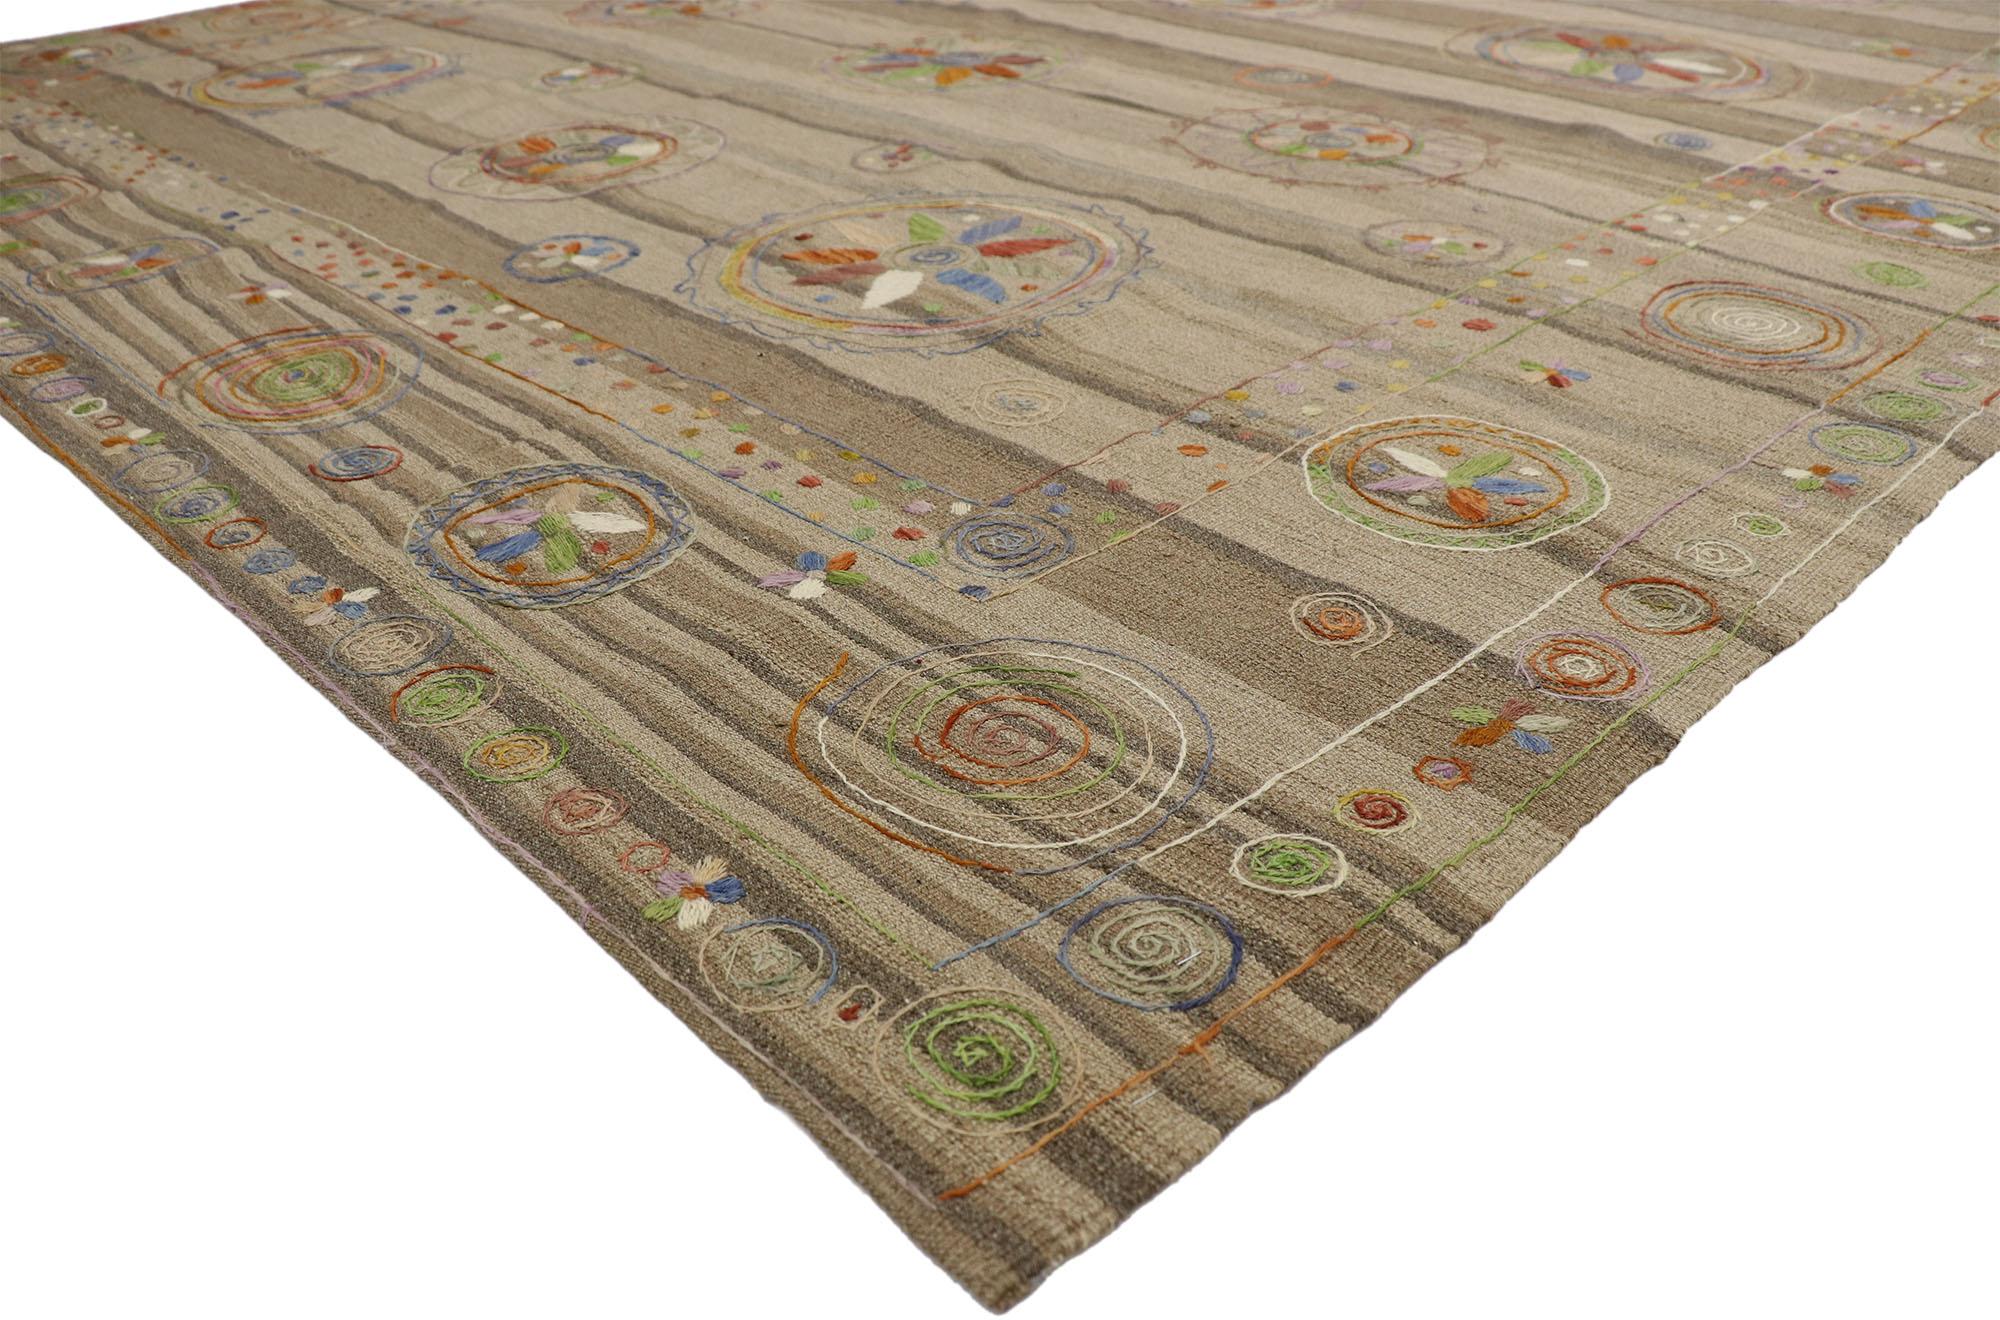 80102, vintage Suzani Kilim rug with embroidered Bohemian style. This handwoven wool vintage Suzani Kilim rug features an embroidered Bohemian style. The Suzani Kilim rug displays a beautiful geometric multicolored design composed of large and small